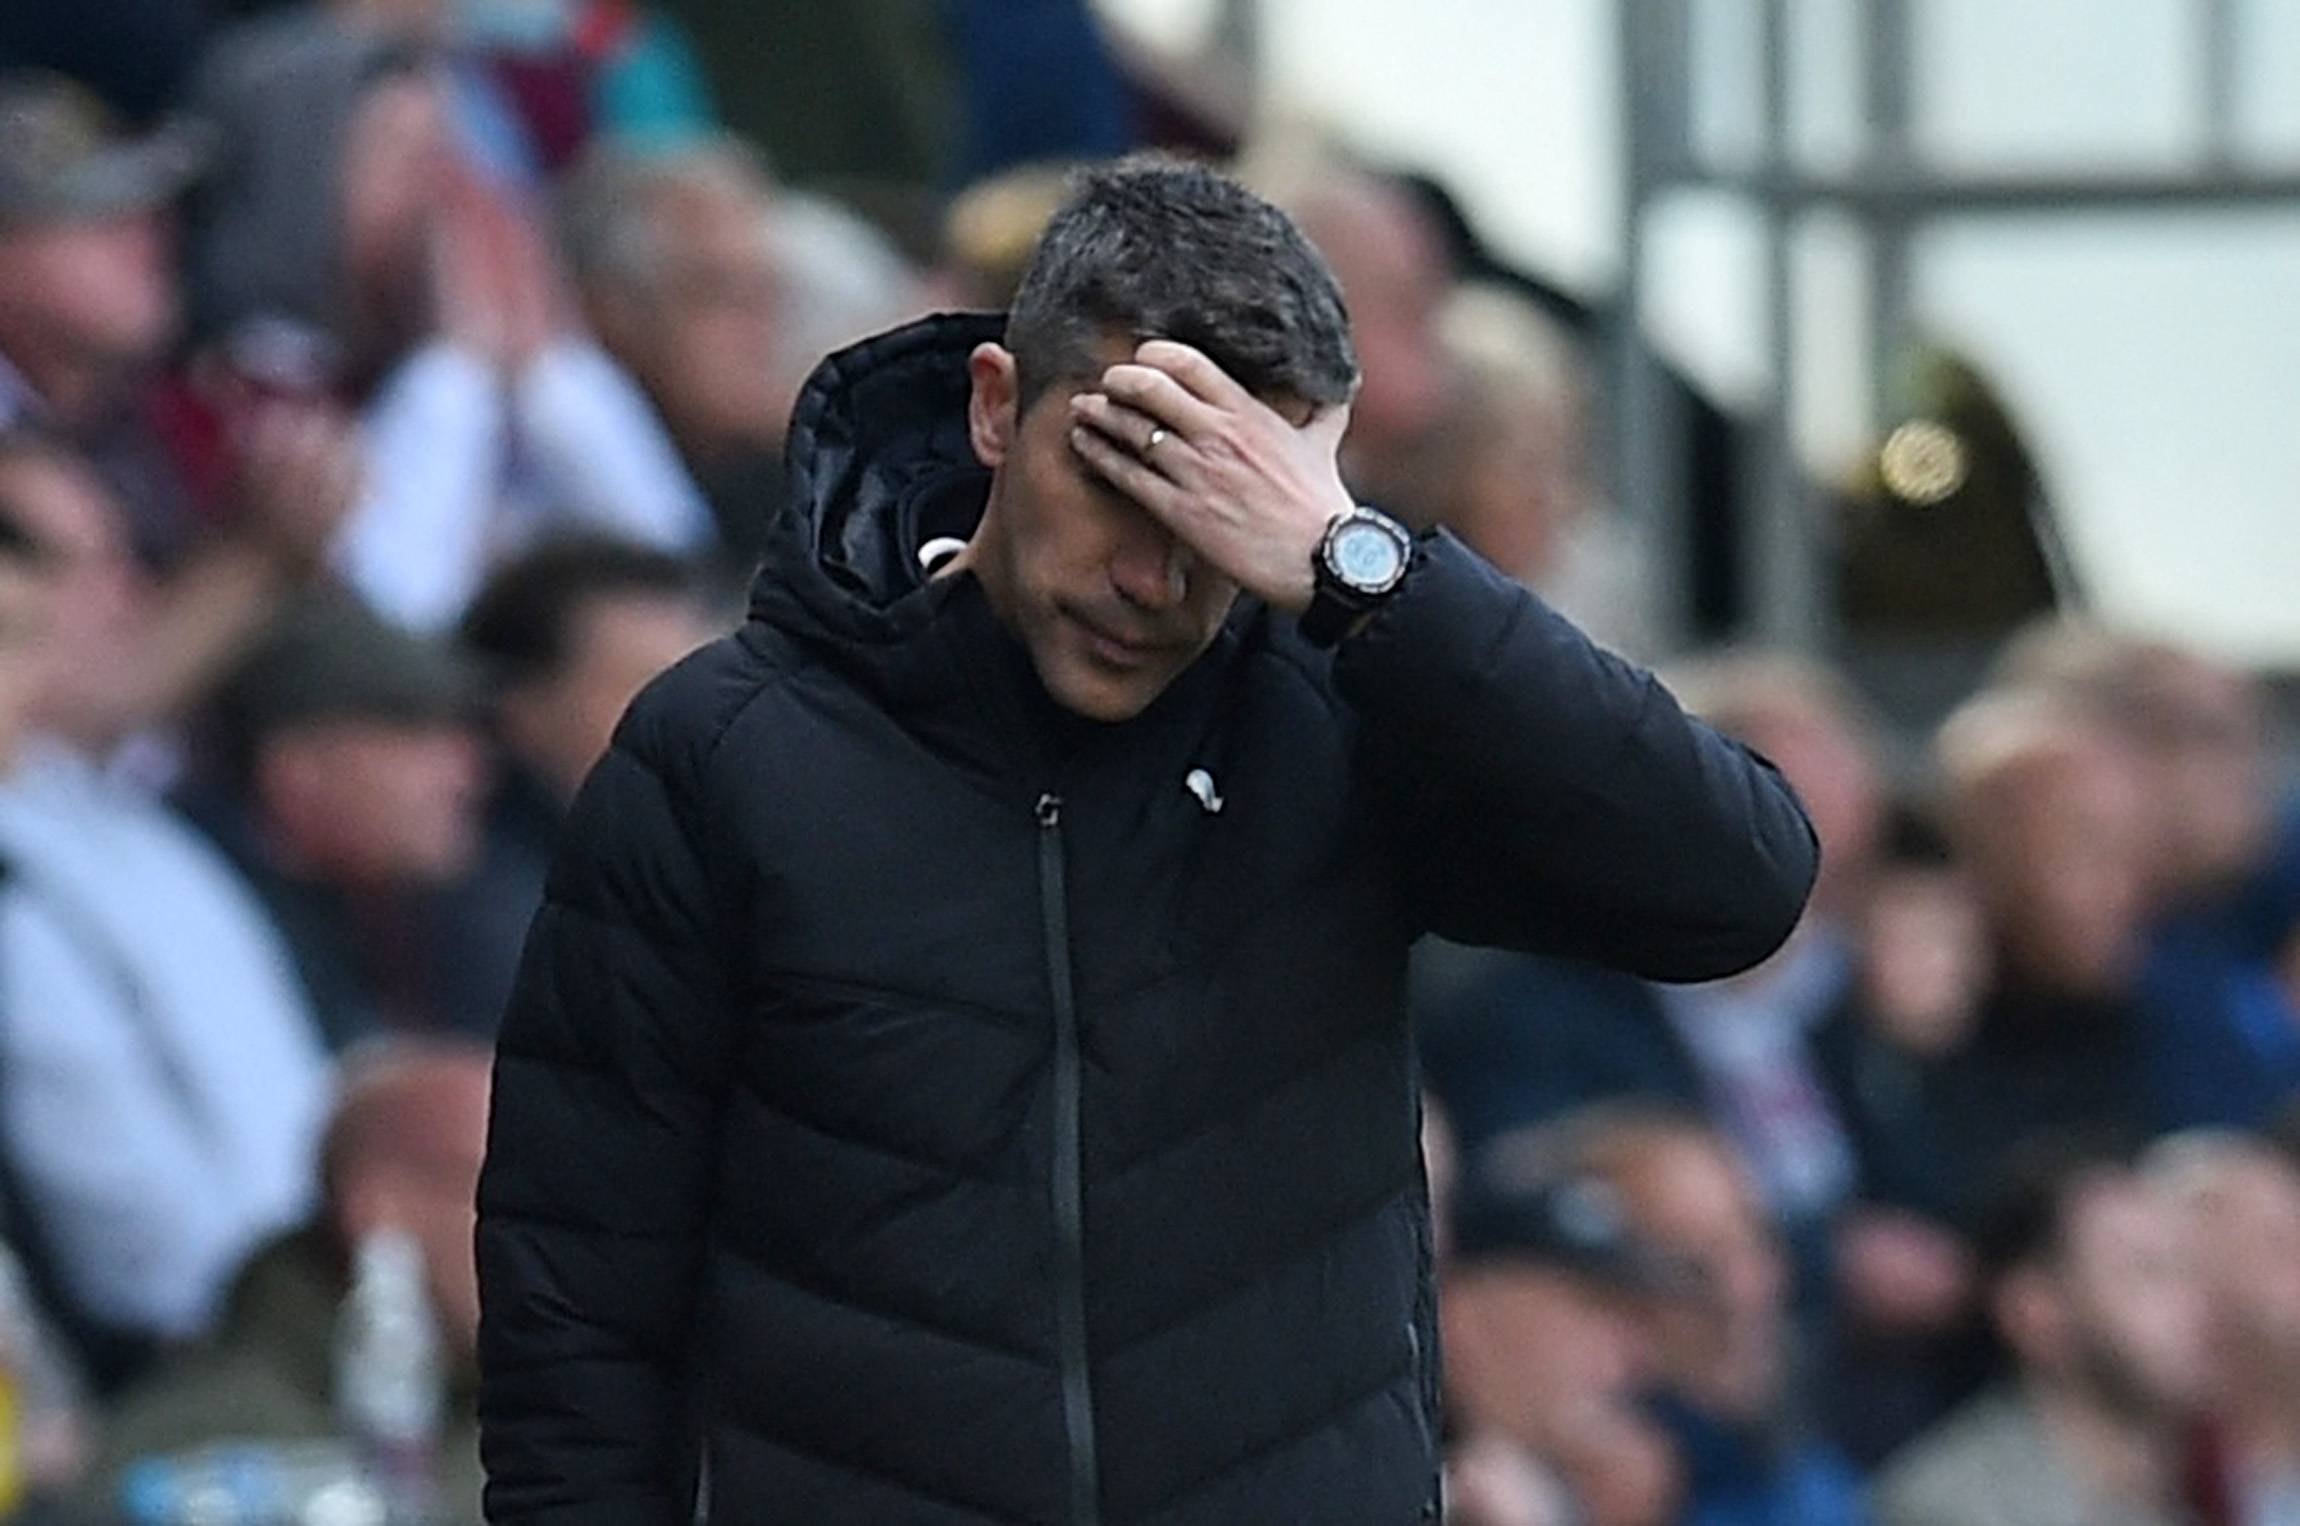 Wolves boss Bruno Lage looking deflated